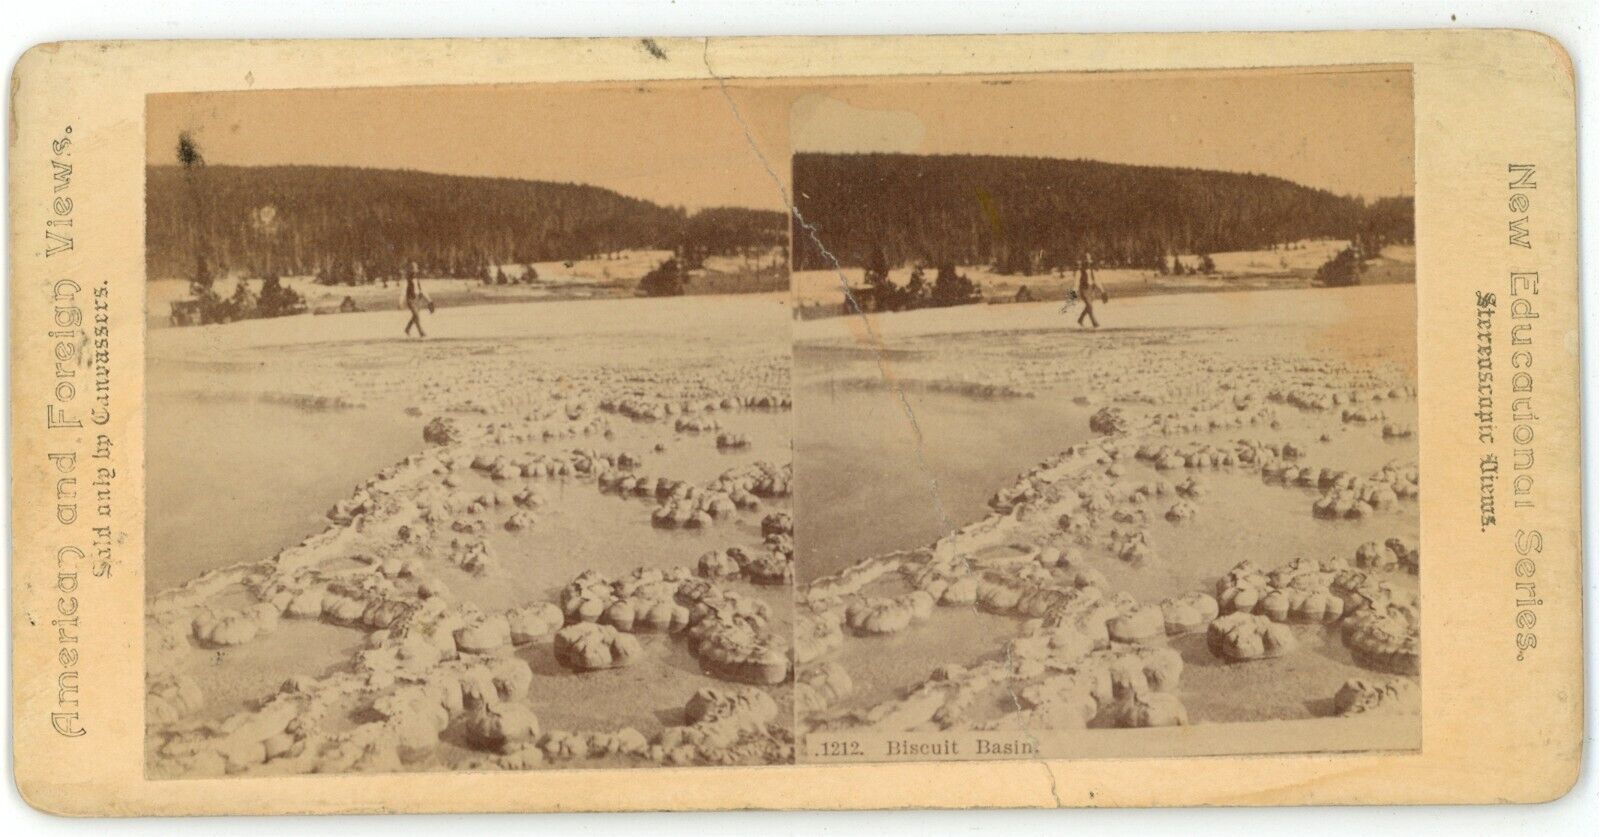 c1890's Real Photo Stereoview Biscuit Basin Yellowstone National Park